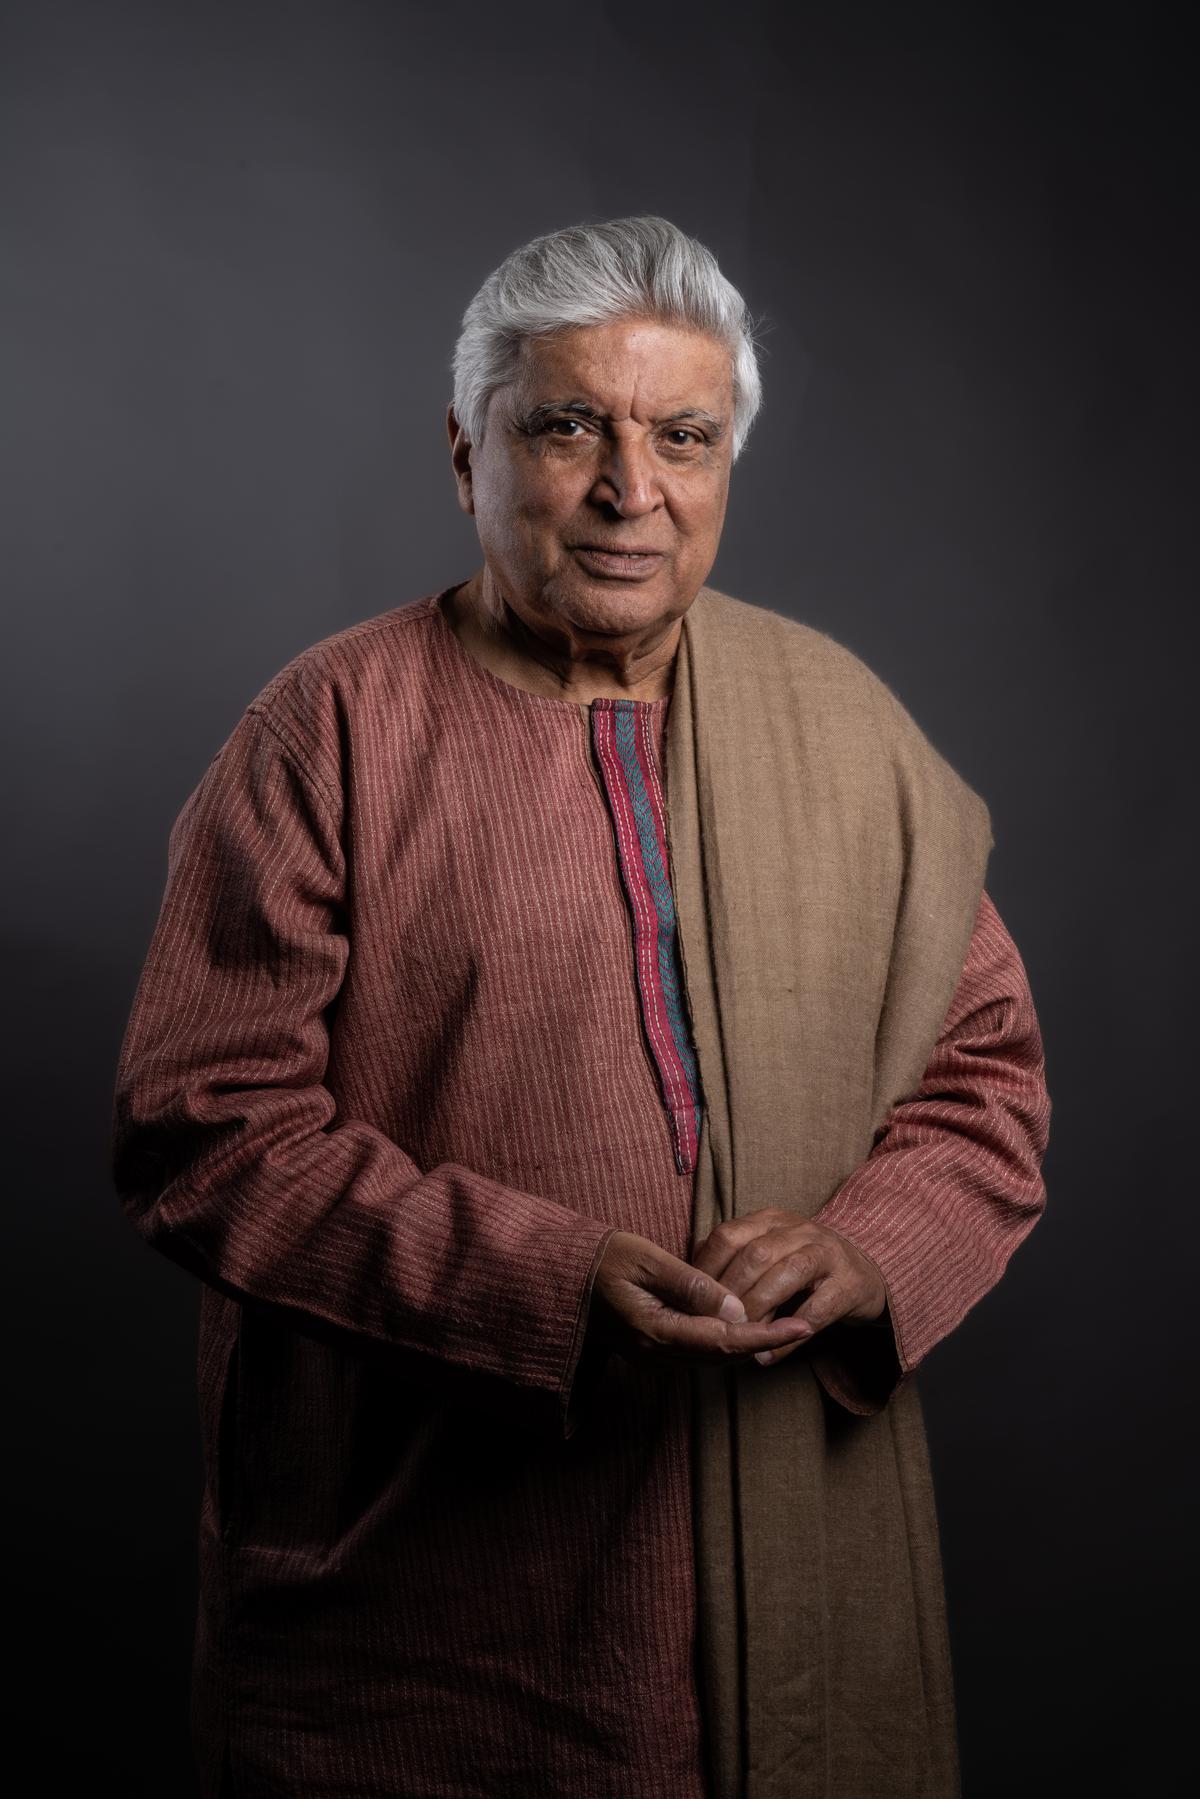 Javed Akhtar, poet, lyricist, screenwriter and the chairman of IPRS